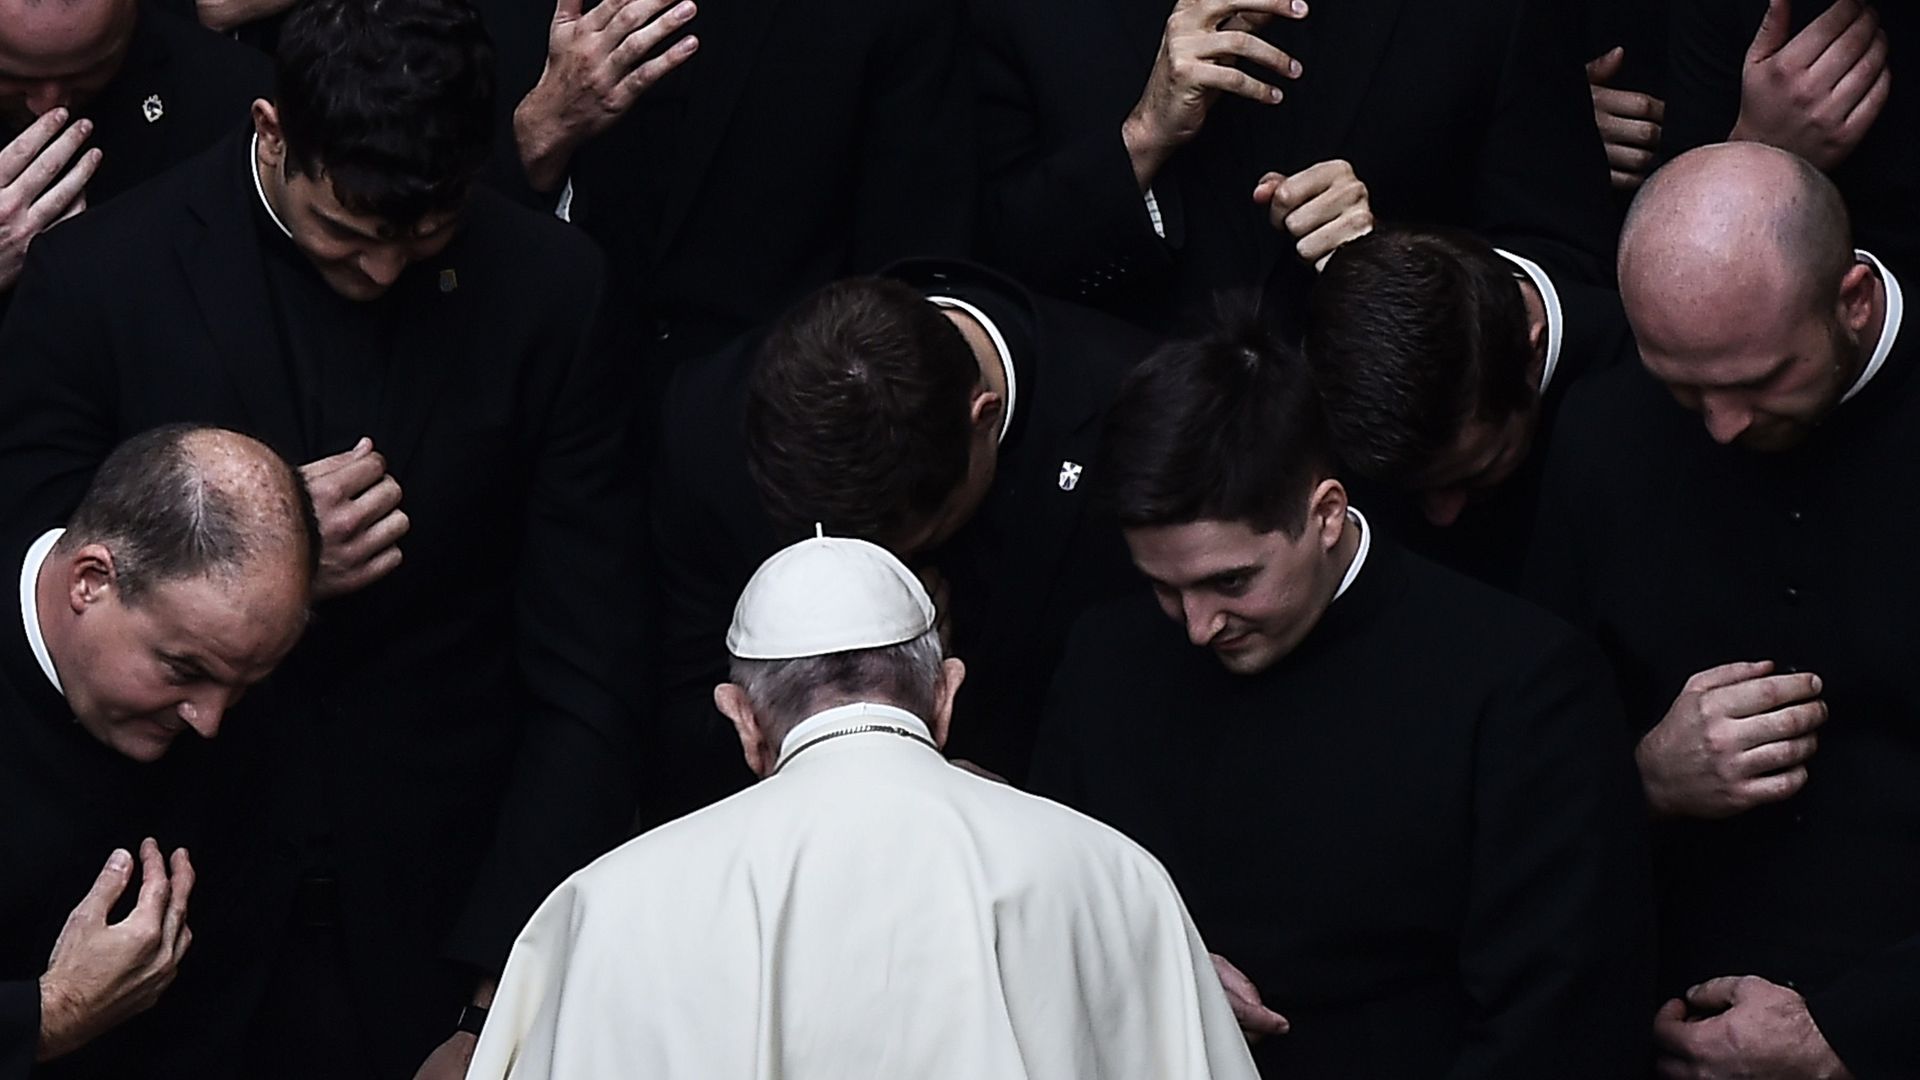 Pope Francis prays with priests at the end of a limited public audience at the San Damaso courtyard in The Vatican. Photo: AFP via Getty Images